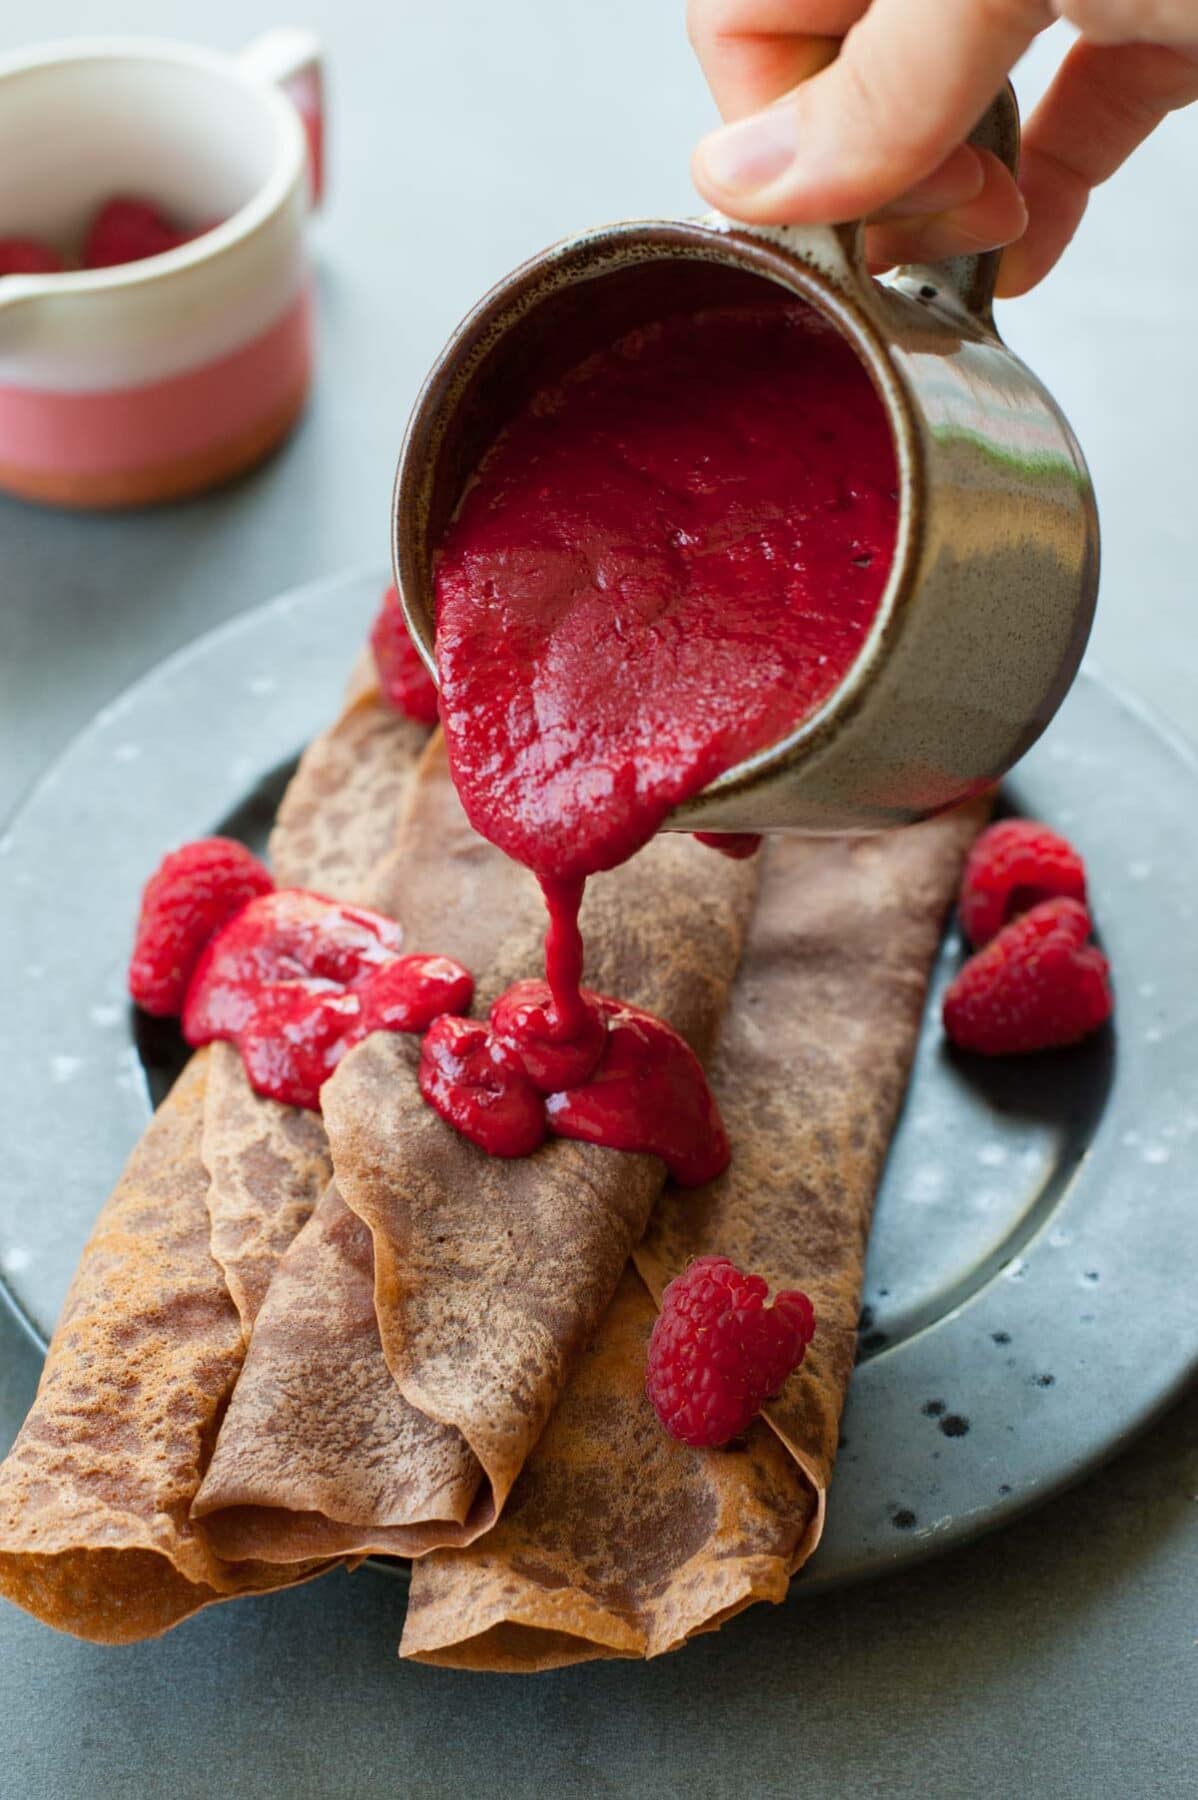 raspberry sauce is being poured over chocolate crepes on a black plate